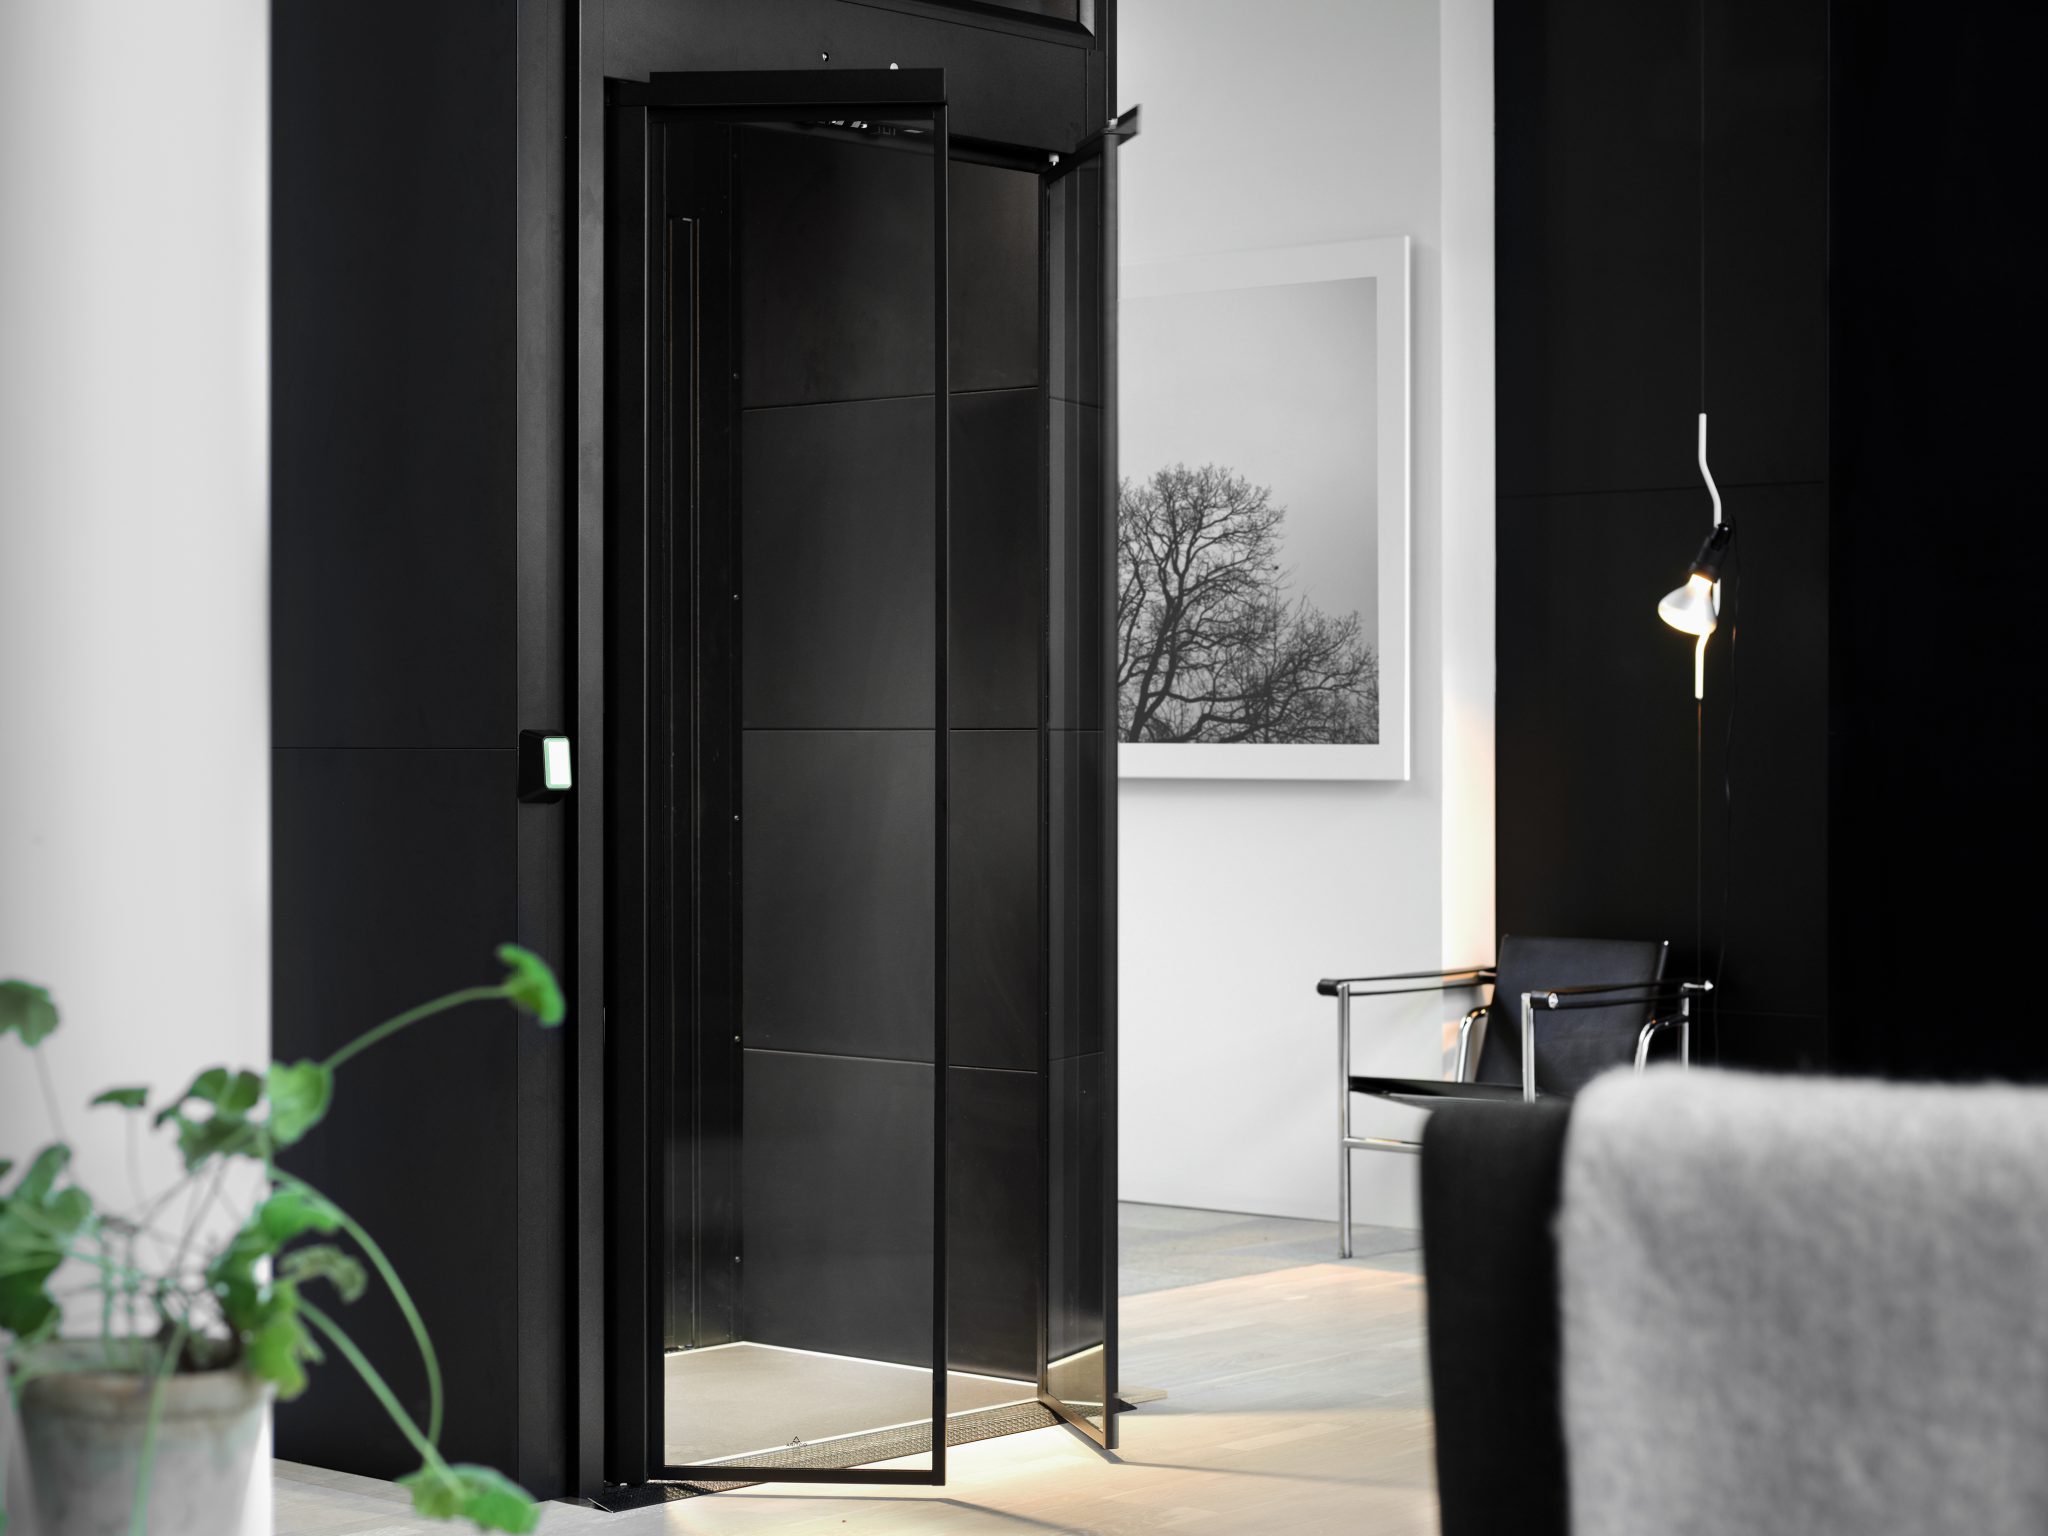 An Aritco HomeLift Elevator from living room